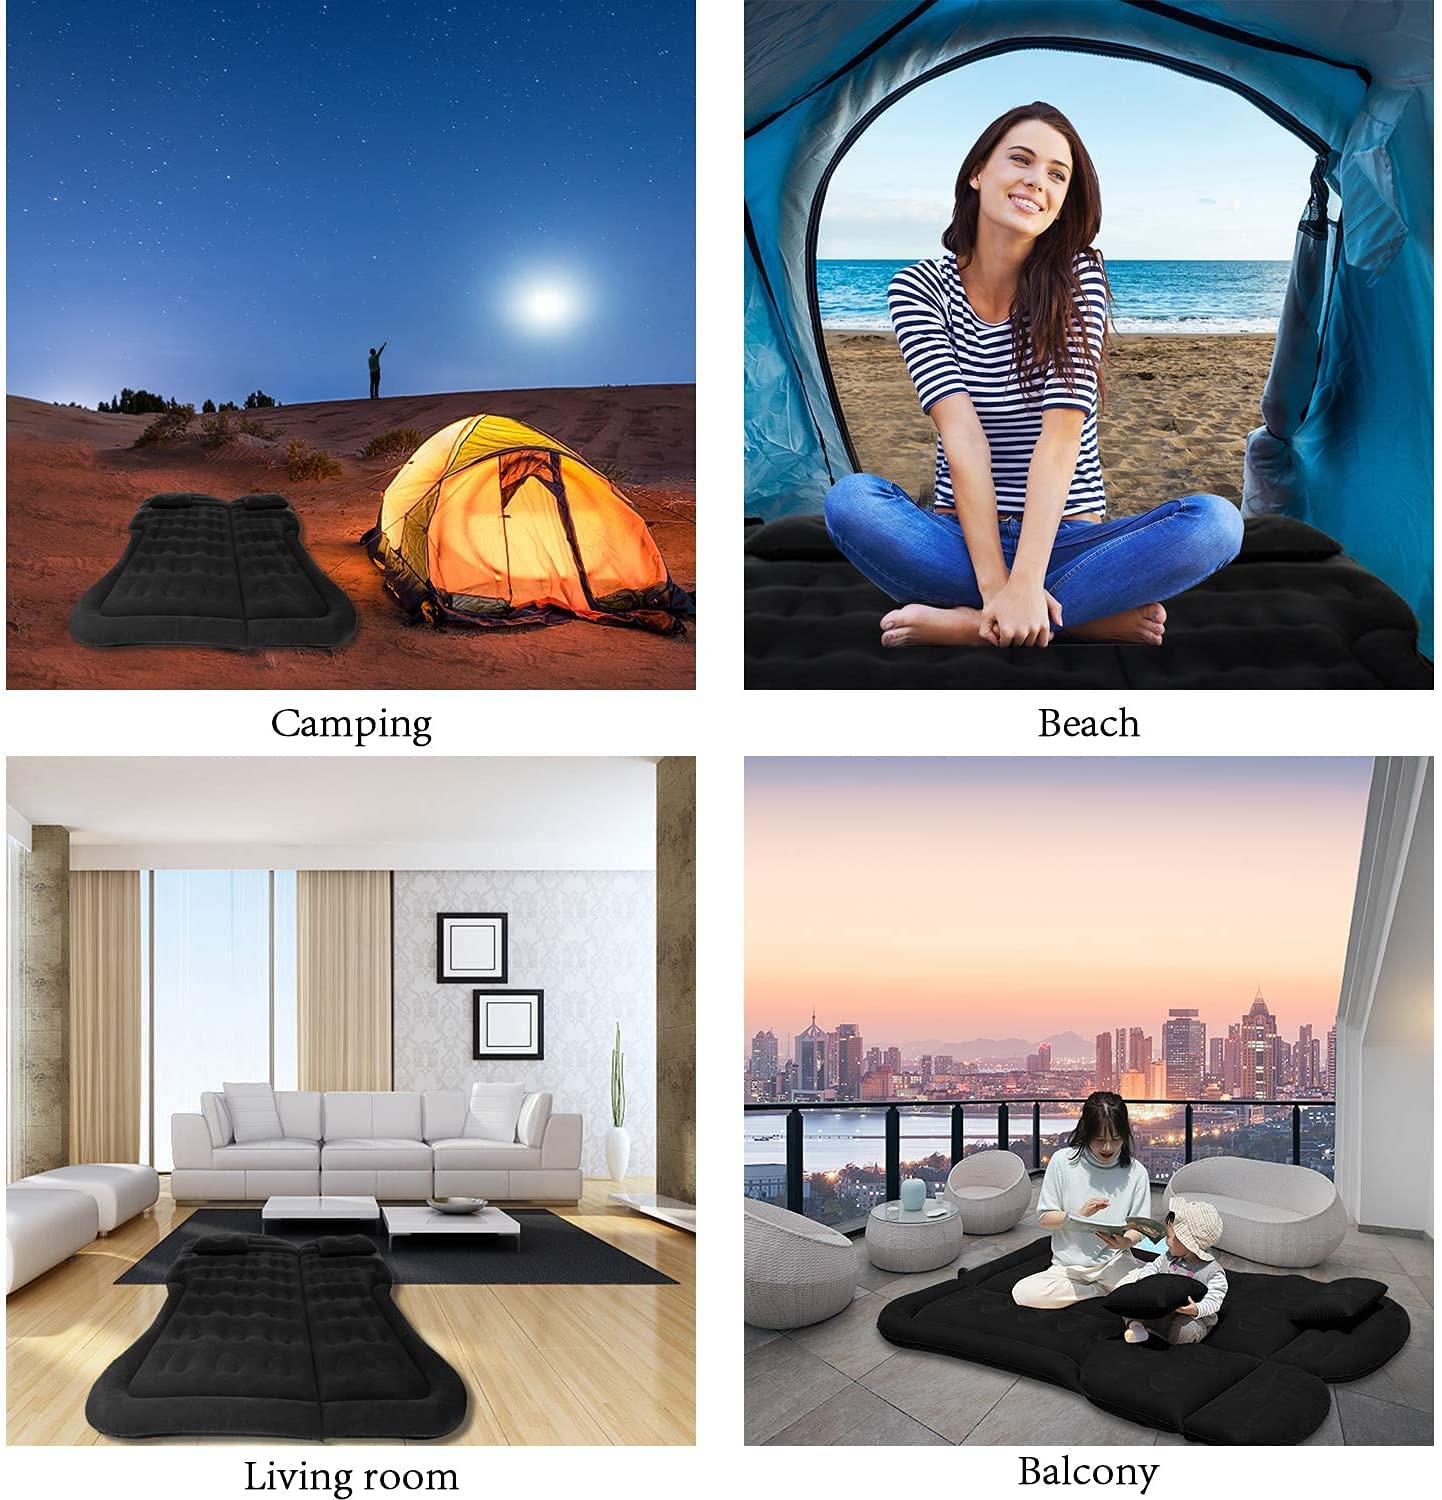 Car SUV Air Mattress Camping Bed Cushion Inflatable Thickened Portable Sleeping Beds